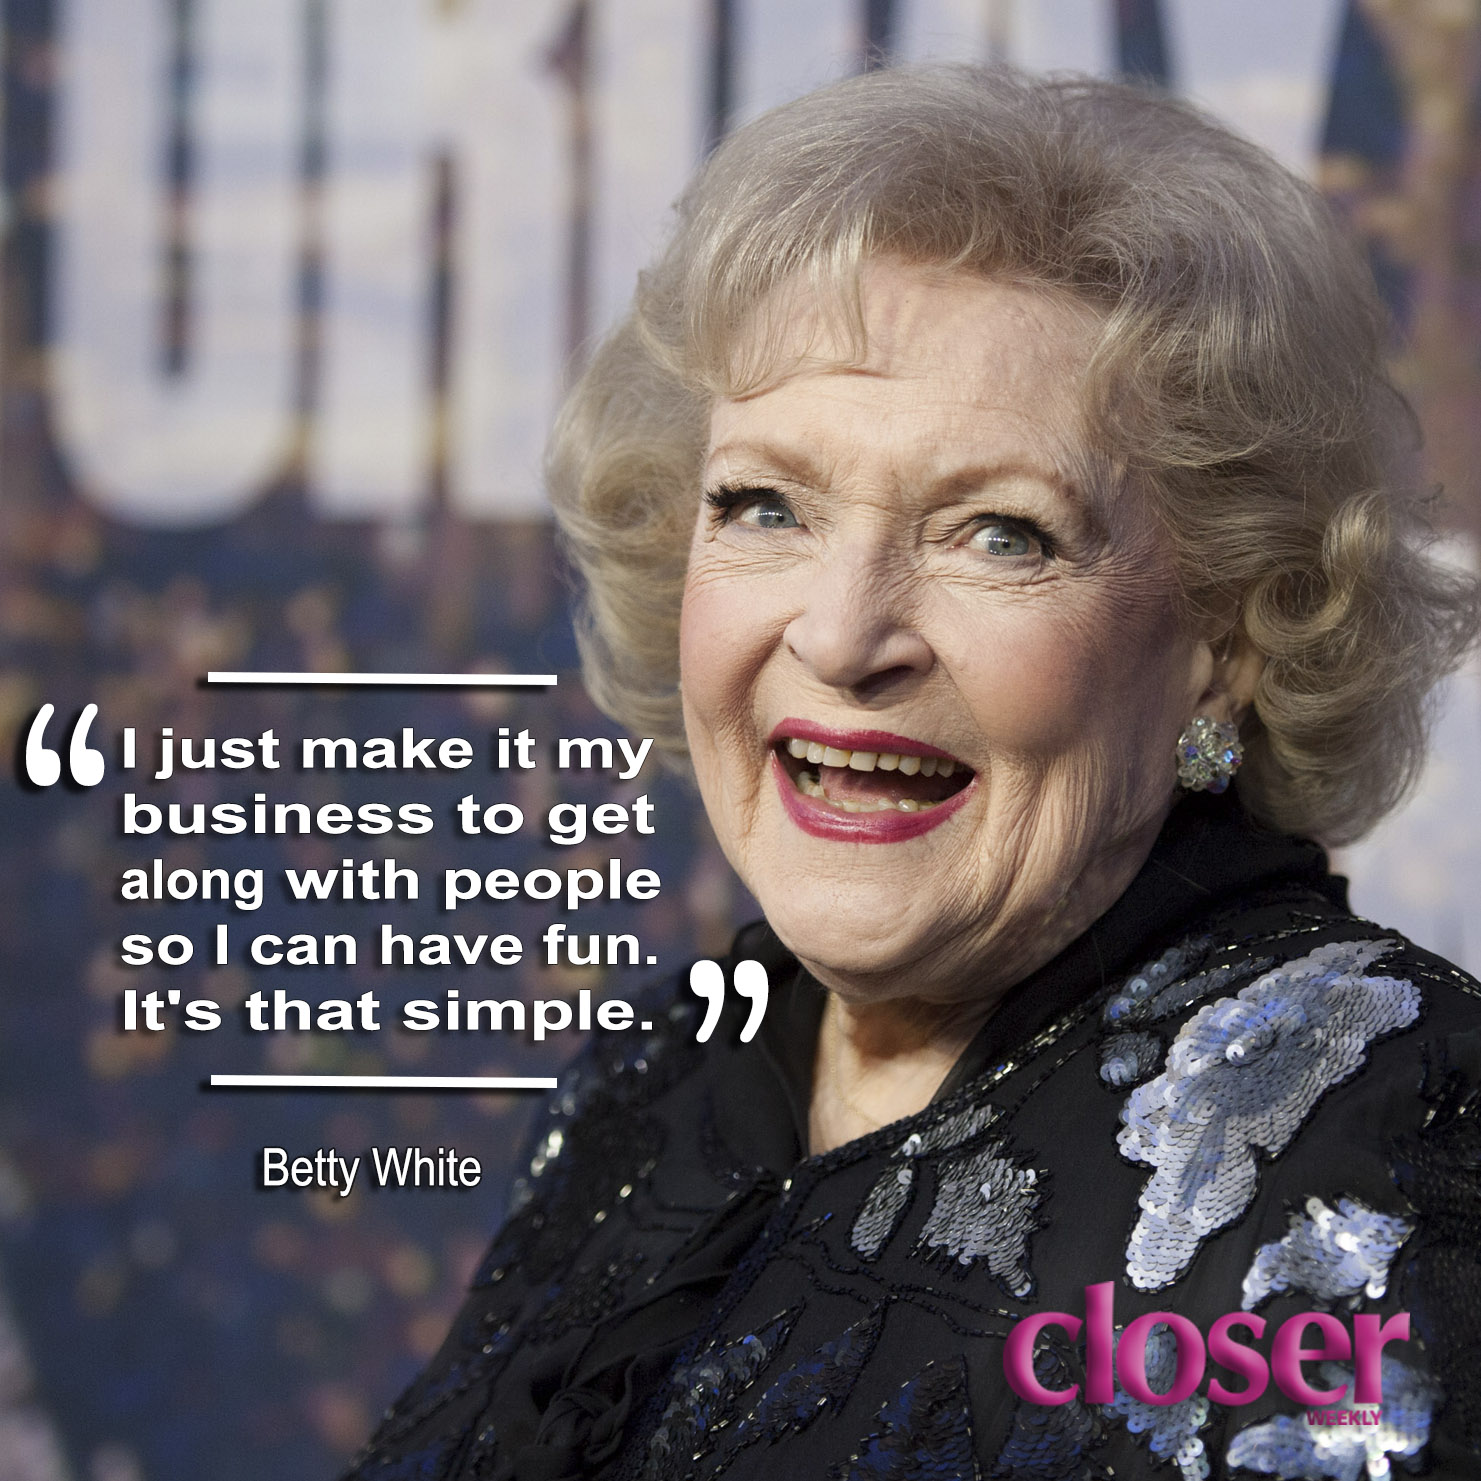 Betty White's Best Quotes: Read Her Funniest Lines On Her Birthday!